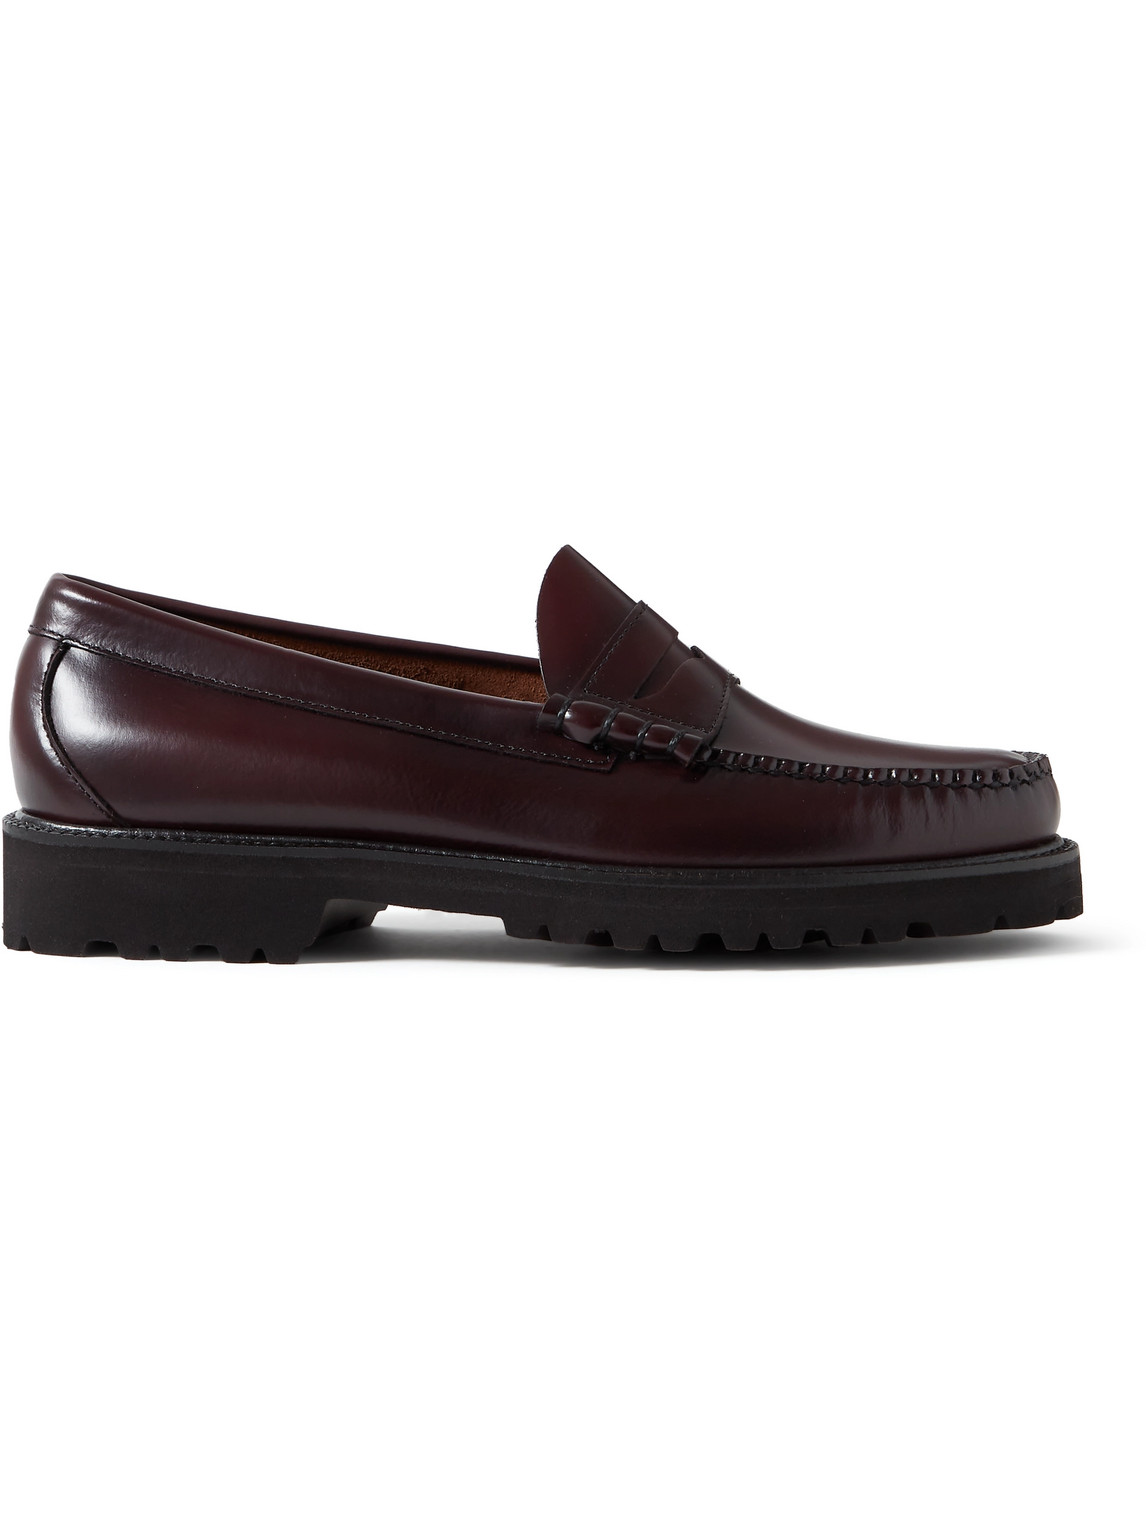 G.H. Bass & Co. - Weejuns 90 Larson Leather Penny Loafers - Men - Burgundy - UK 9 von G.H. Bass & Co.